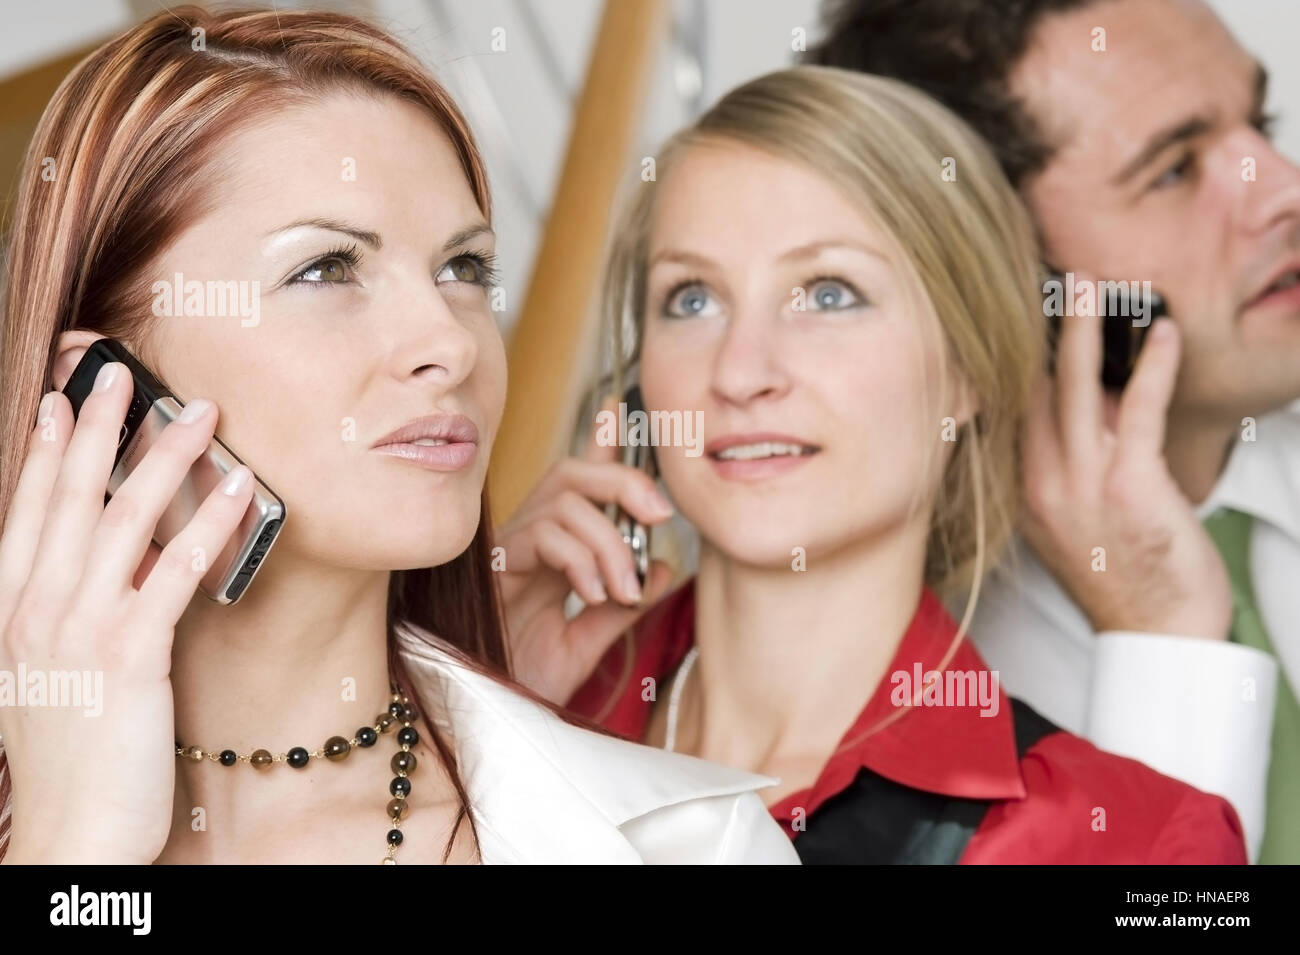 Junge Leute telefonieren mit Handy - young people with mobile phone Stock Photo